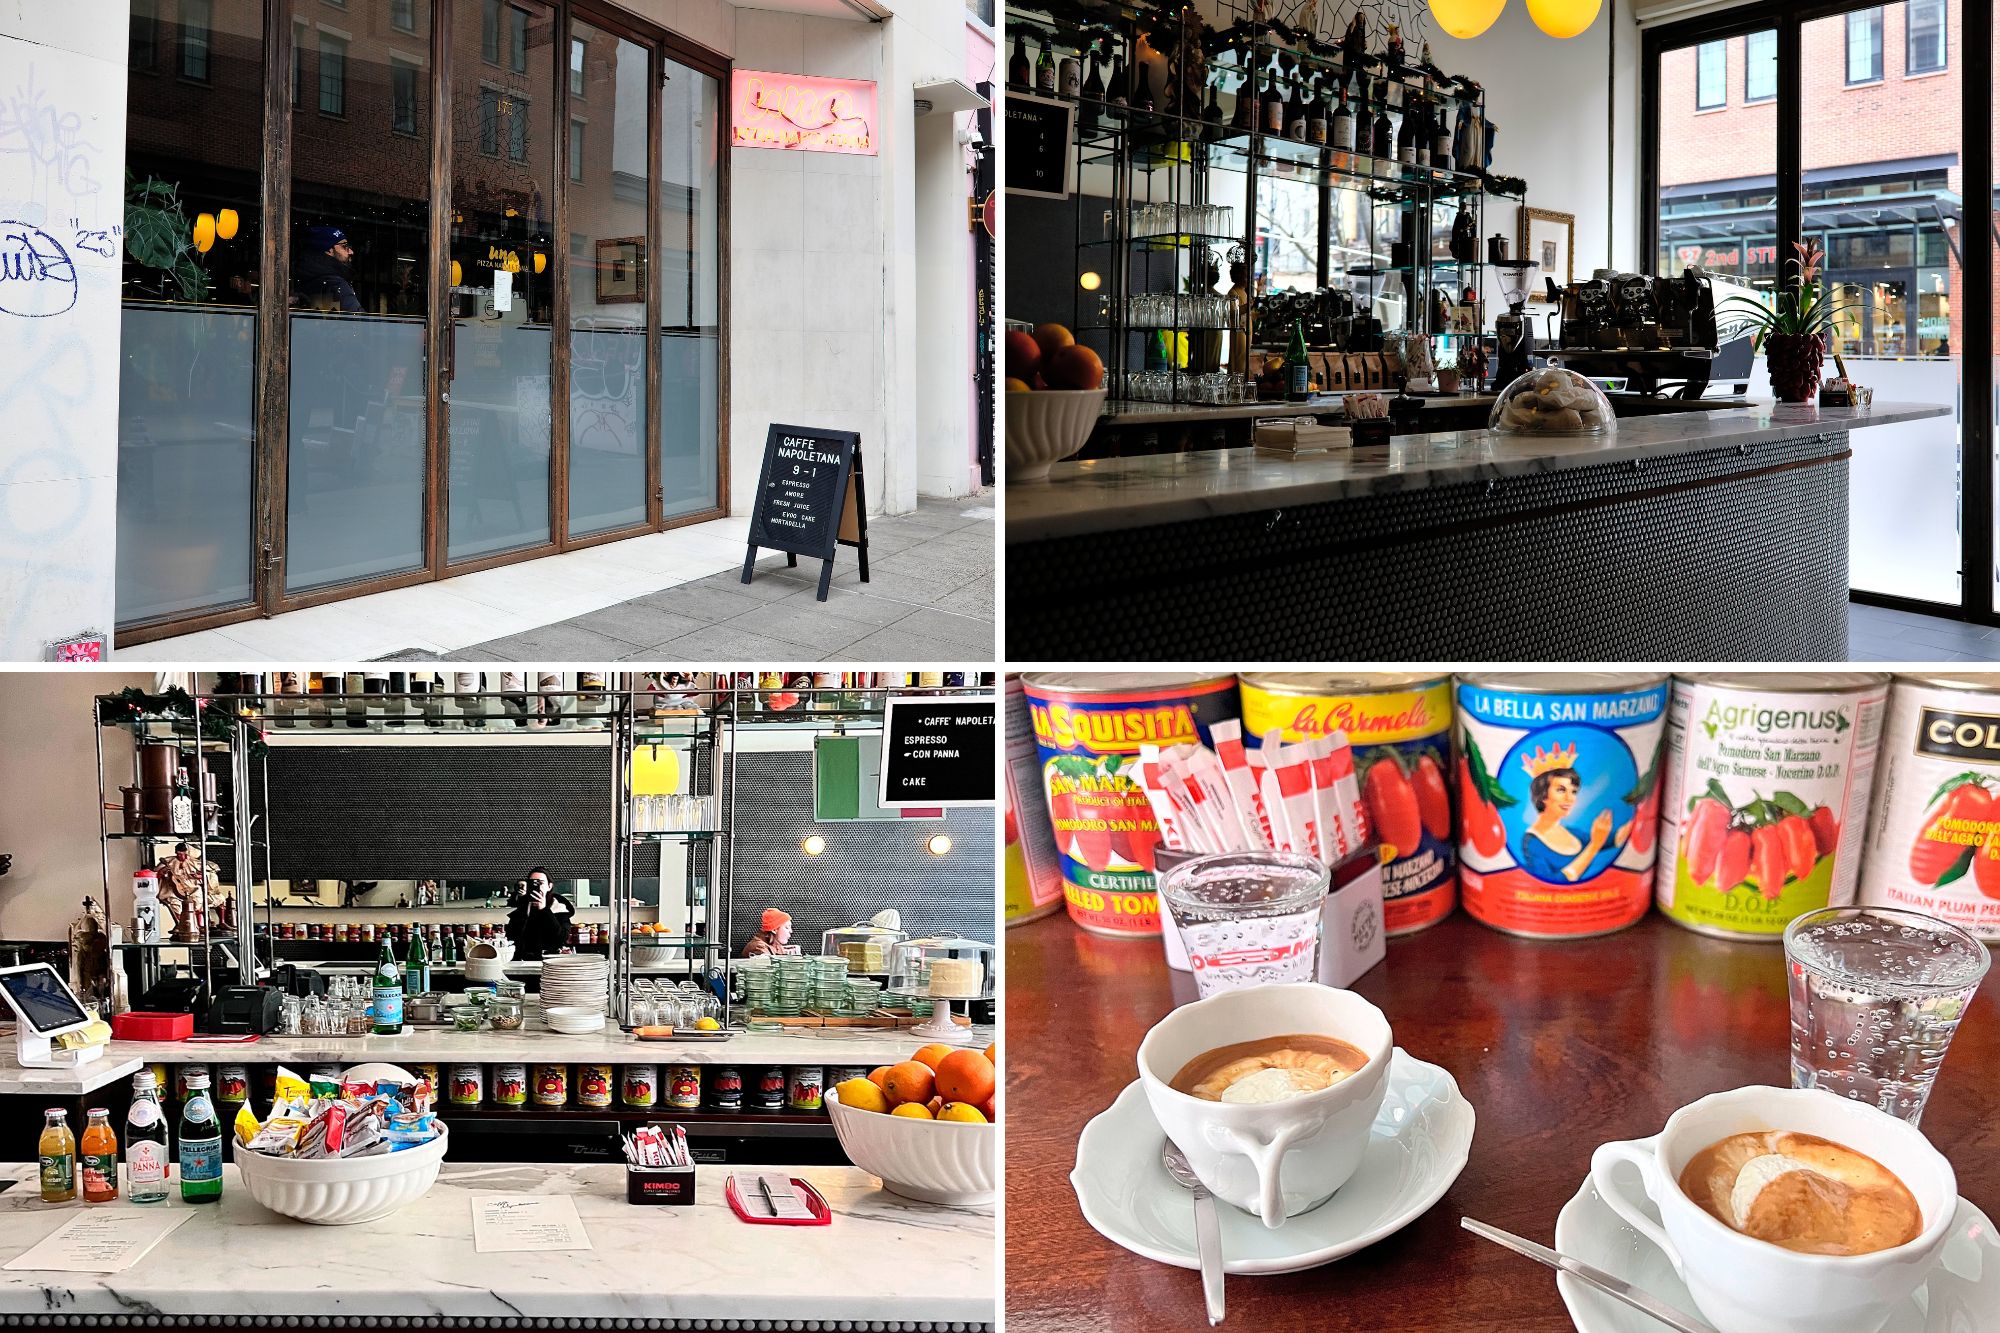 Collage of images from Caffè Napoletana